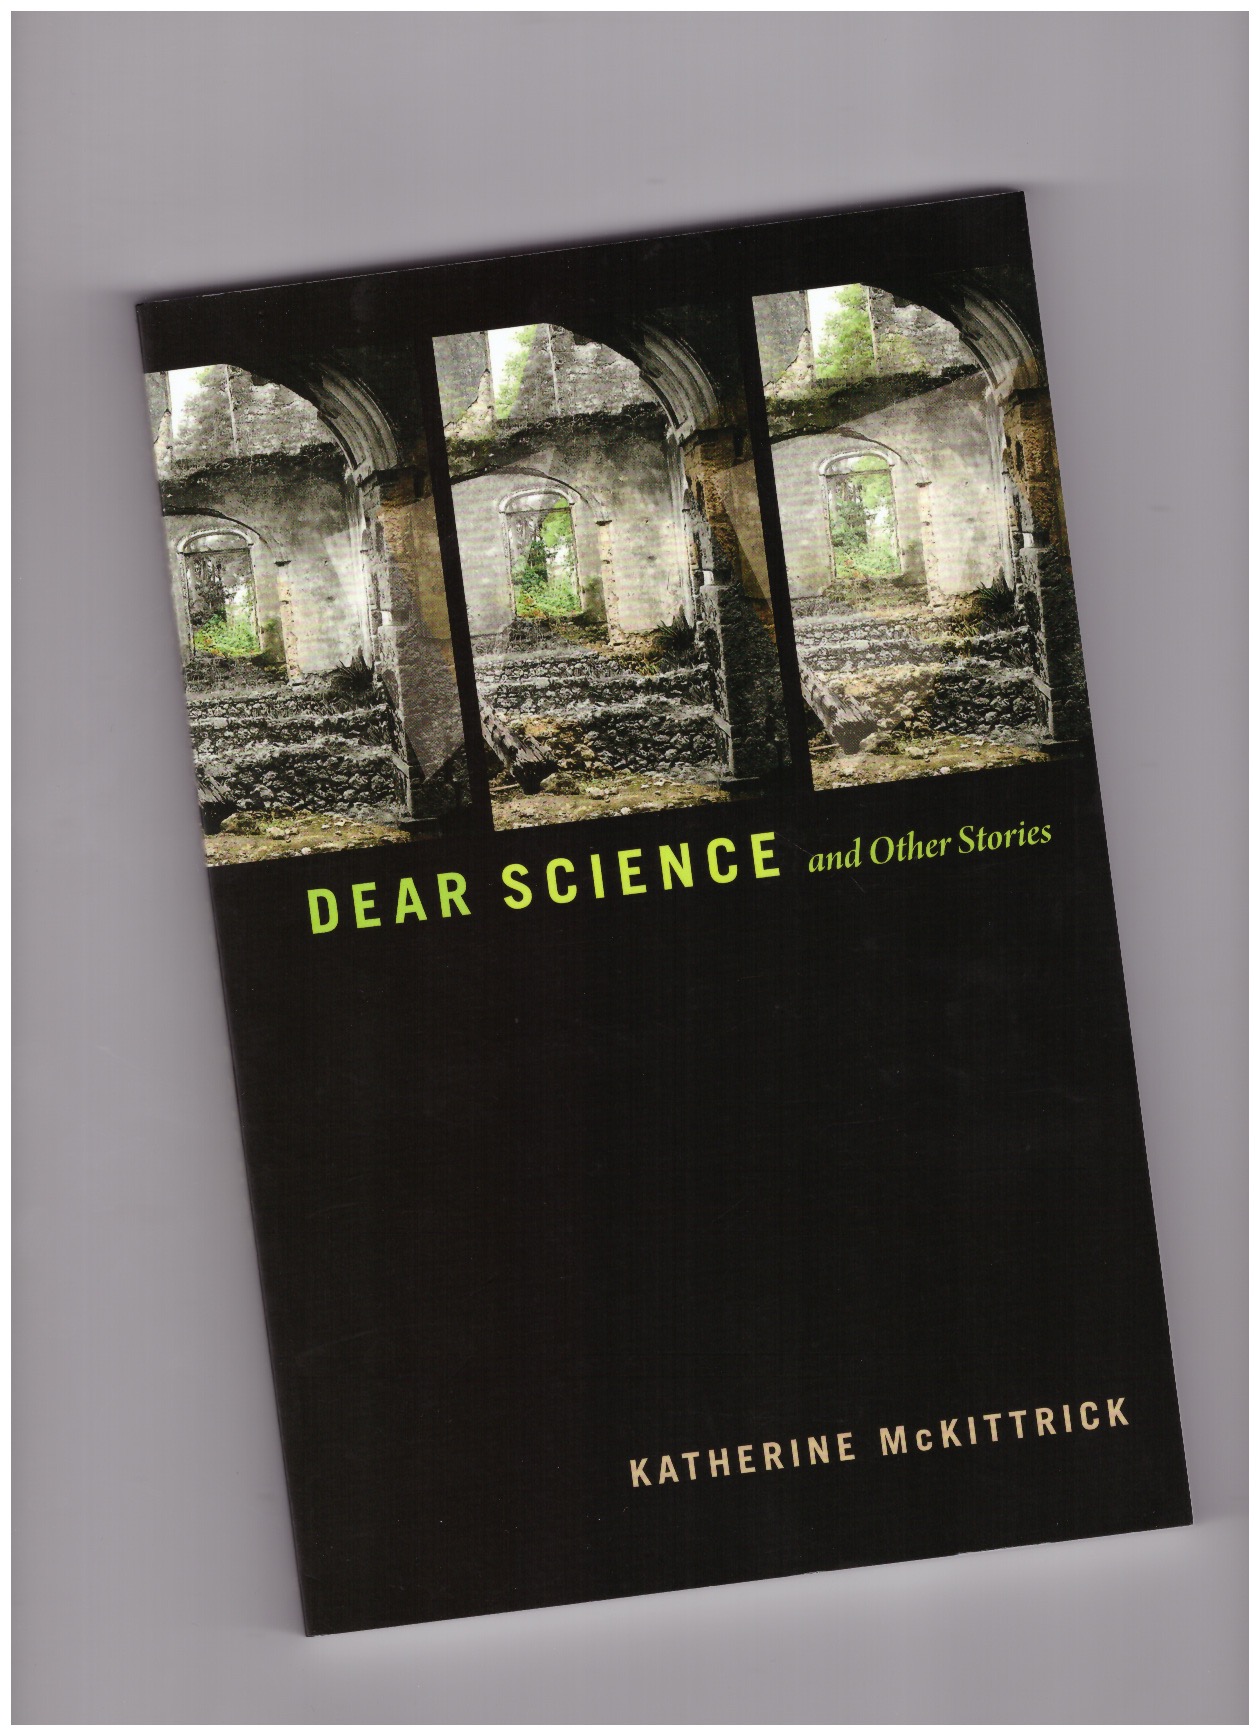 MCKITTRICK, Katherine - Dear Science and Other Stories